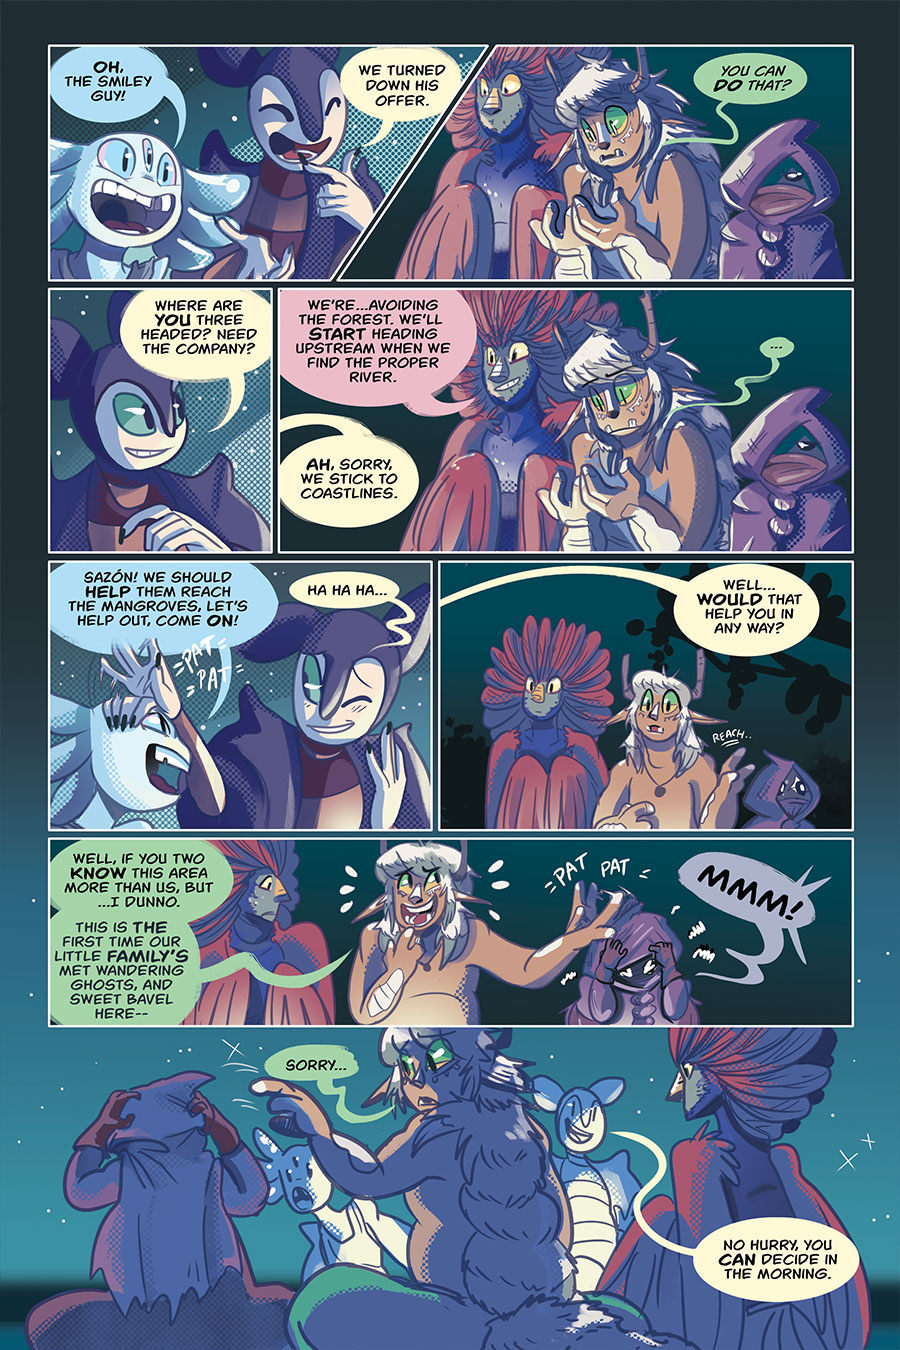 Gone Fishing 006, page 2